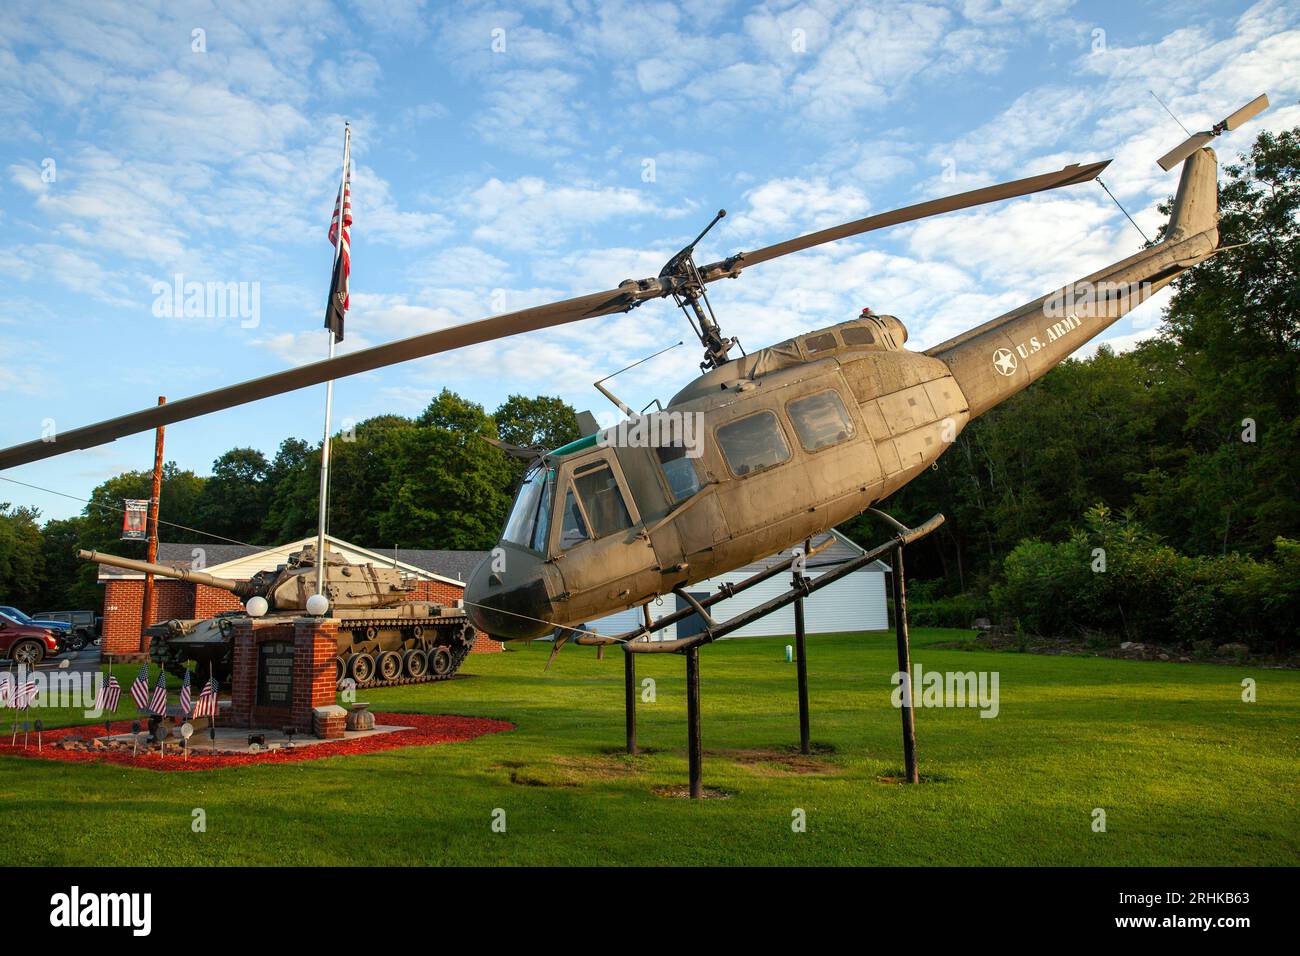 Vietnam era UH-1 Huey helicopter as part of the memorial for veterans of all wars at the American Legion, Post 257, Stoystown, PA 15563 Stock Photo